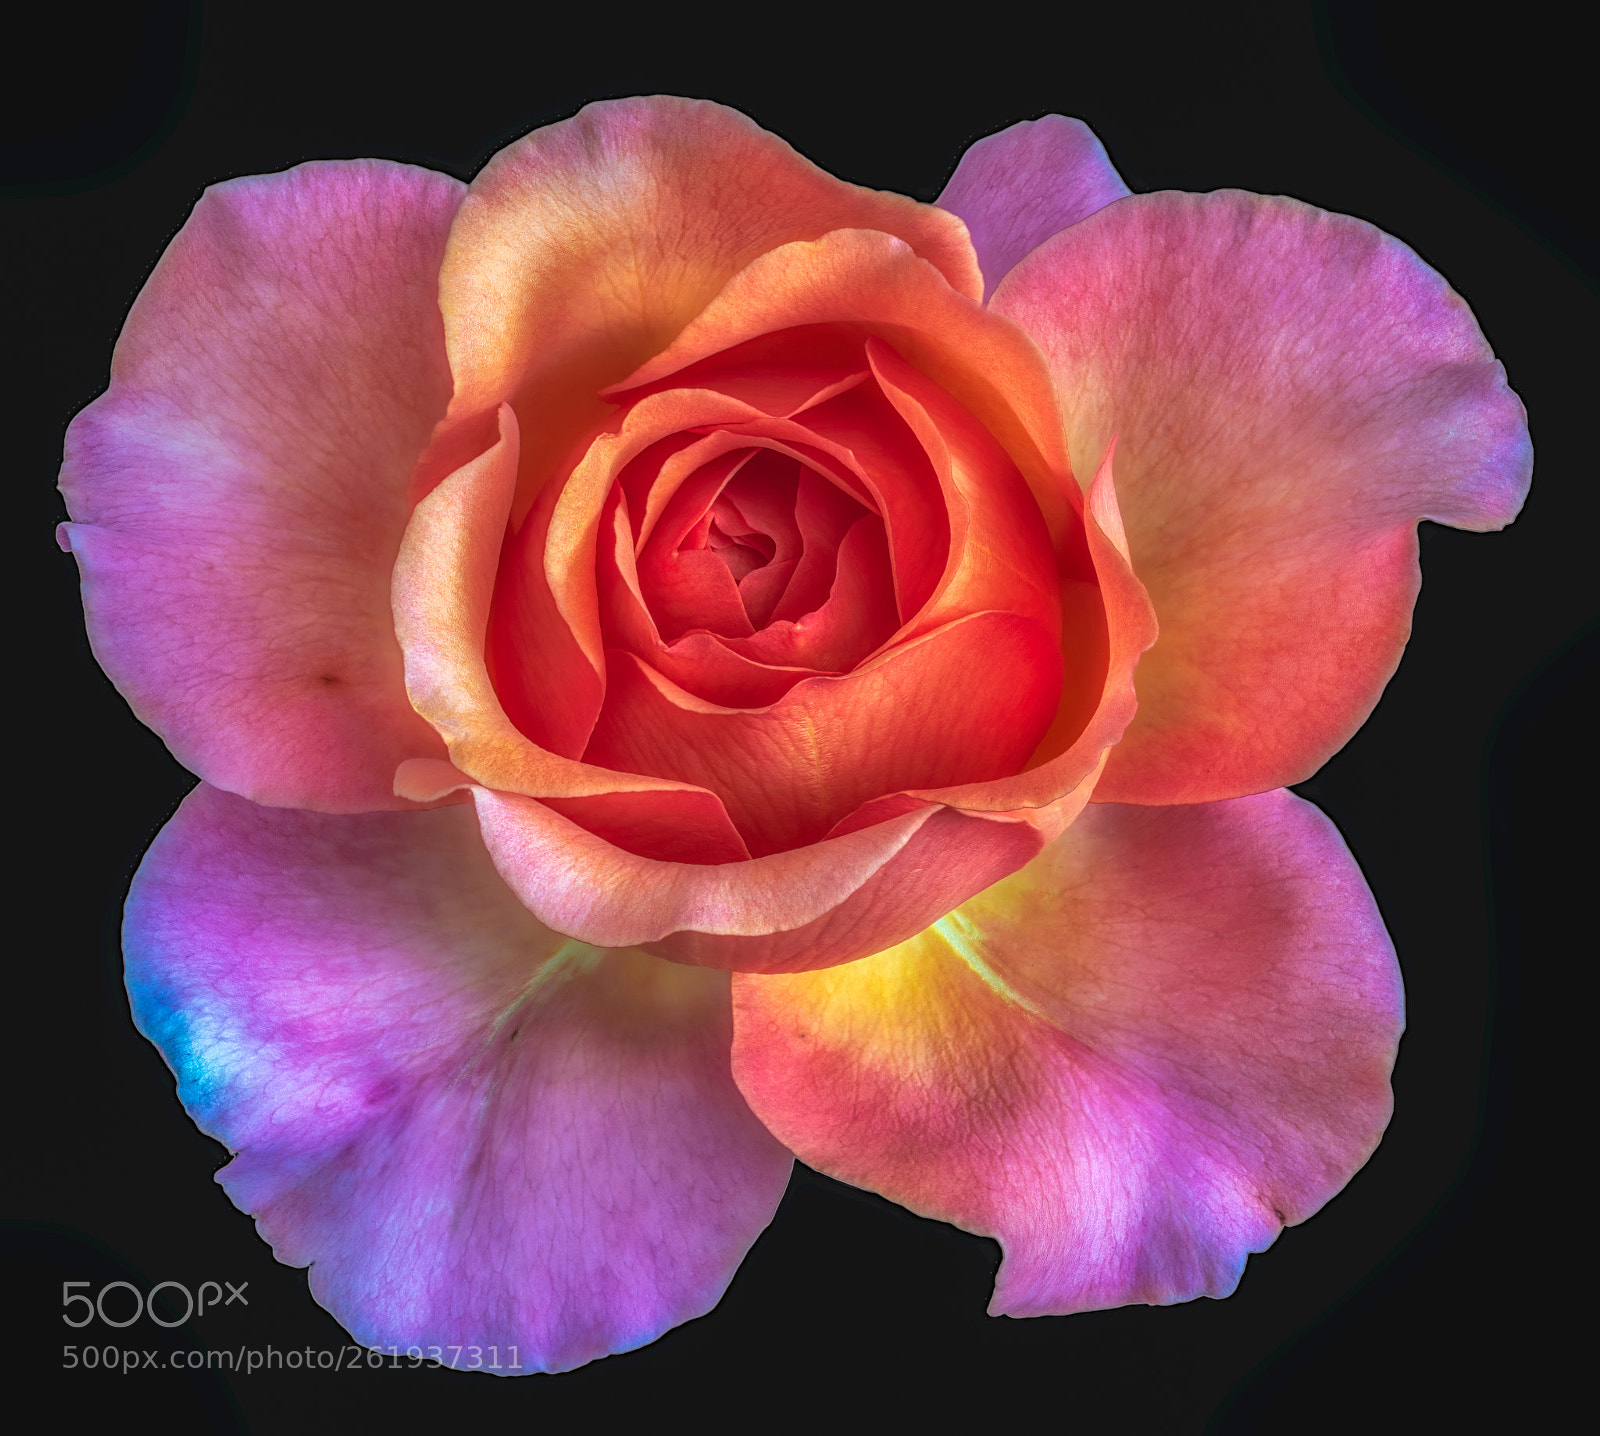 Nikon D810 sample photo. Rose colors continued photography